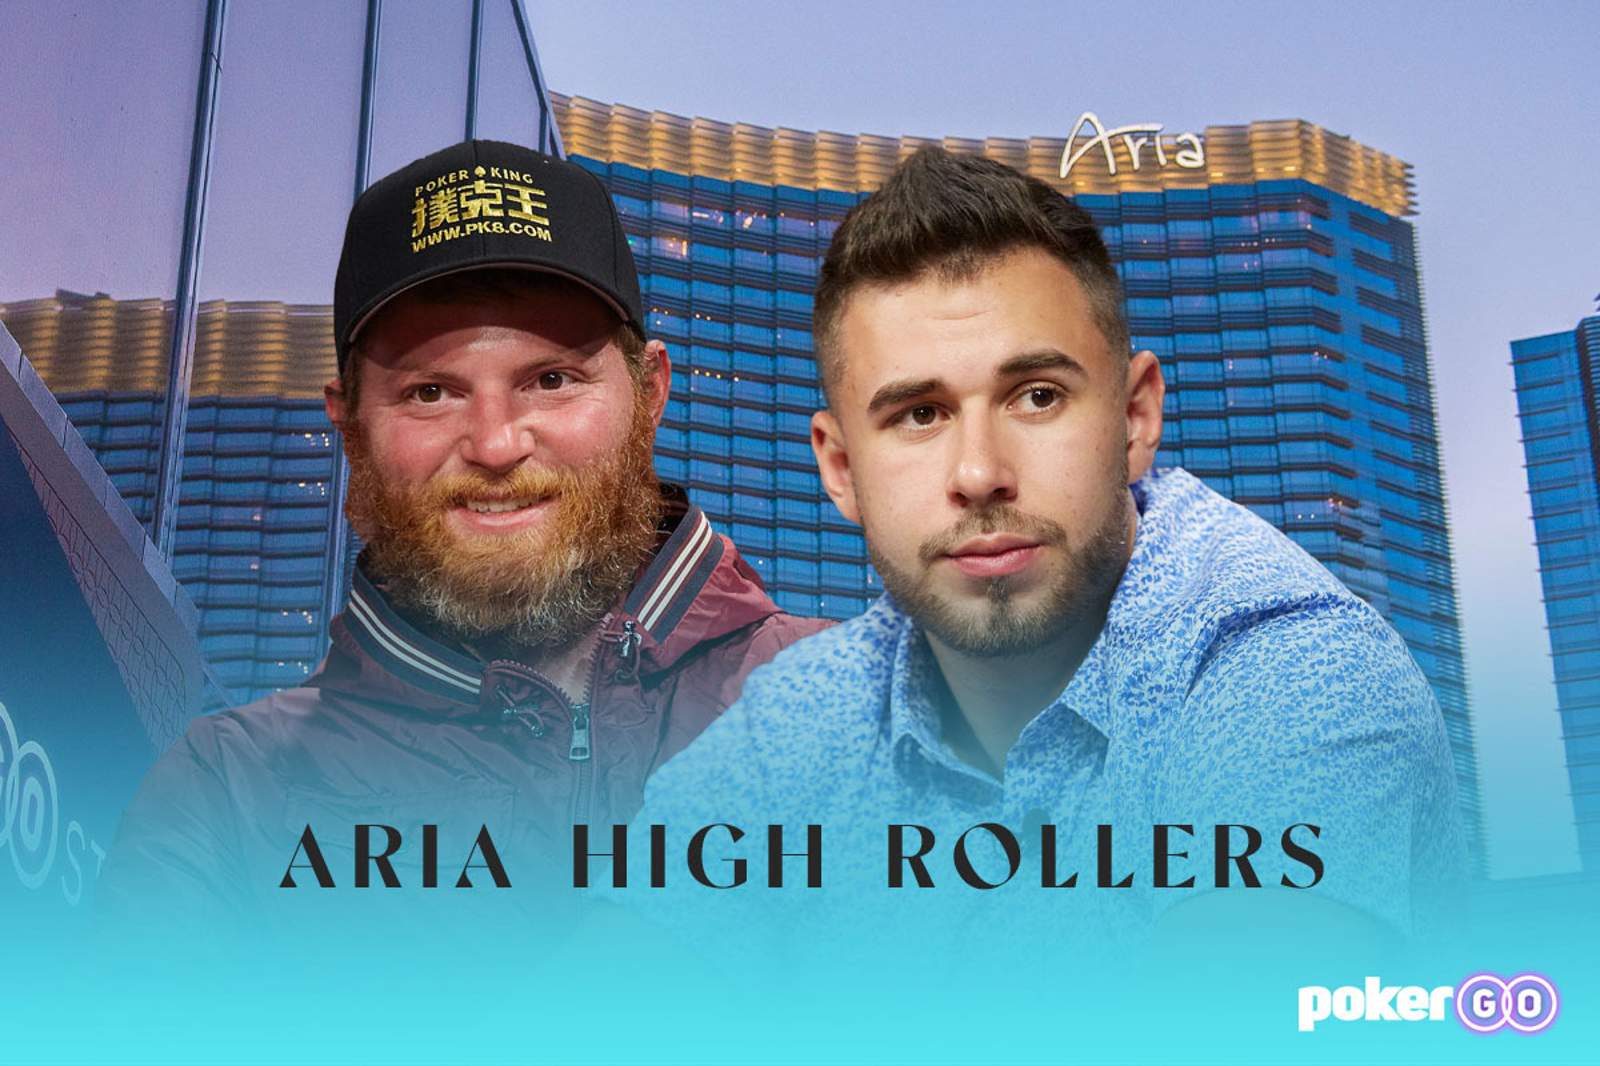 ARIA High Rollers Won by Nick Petrangelo and Sean Perry